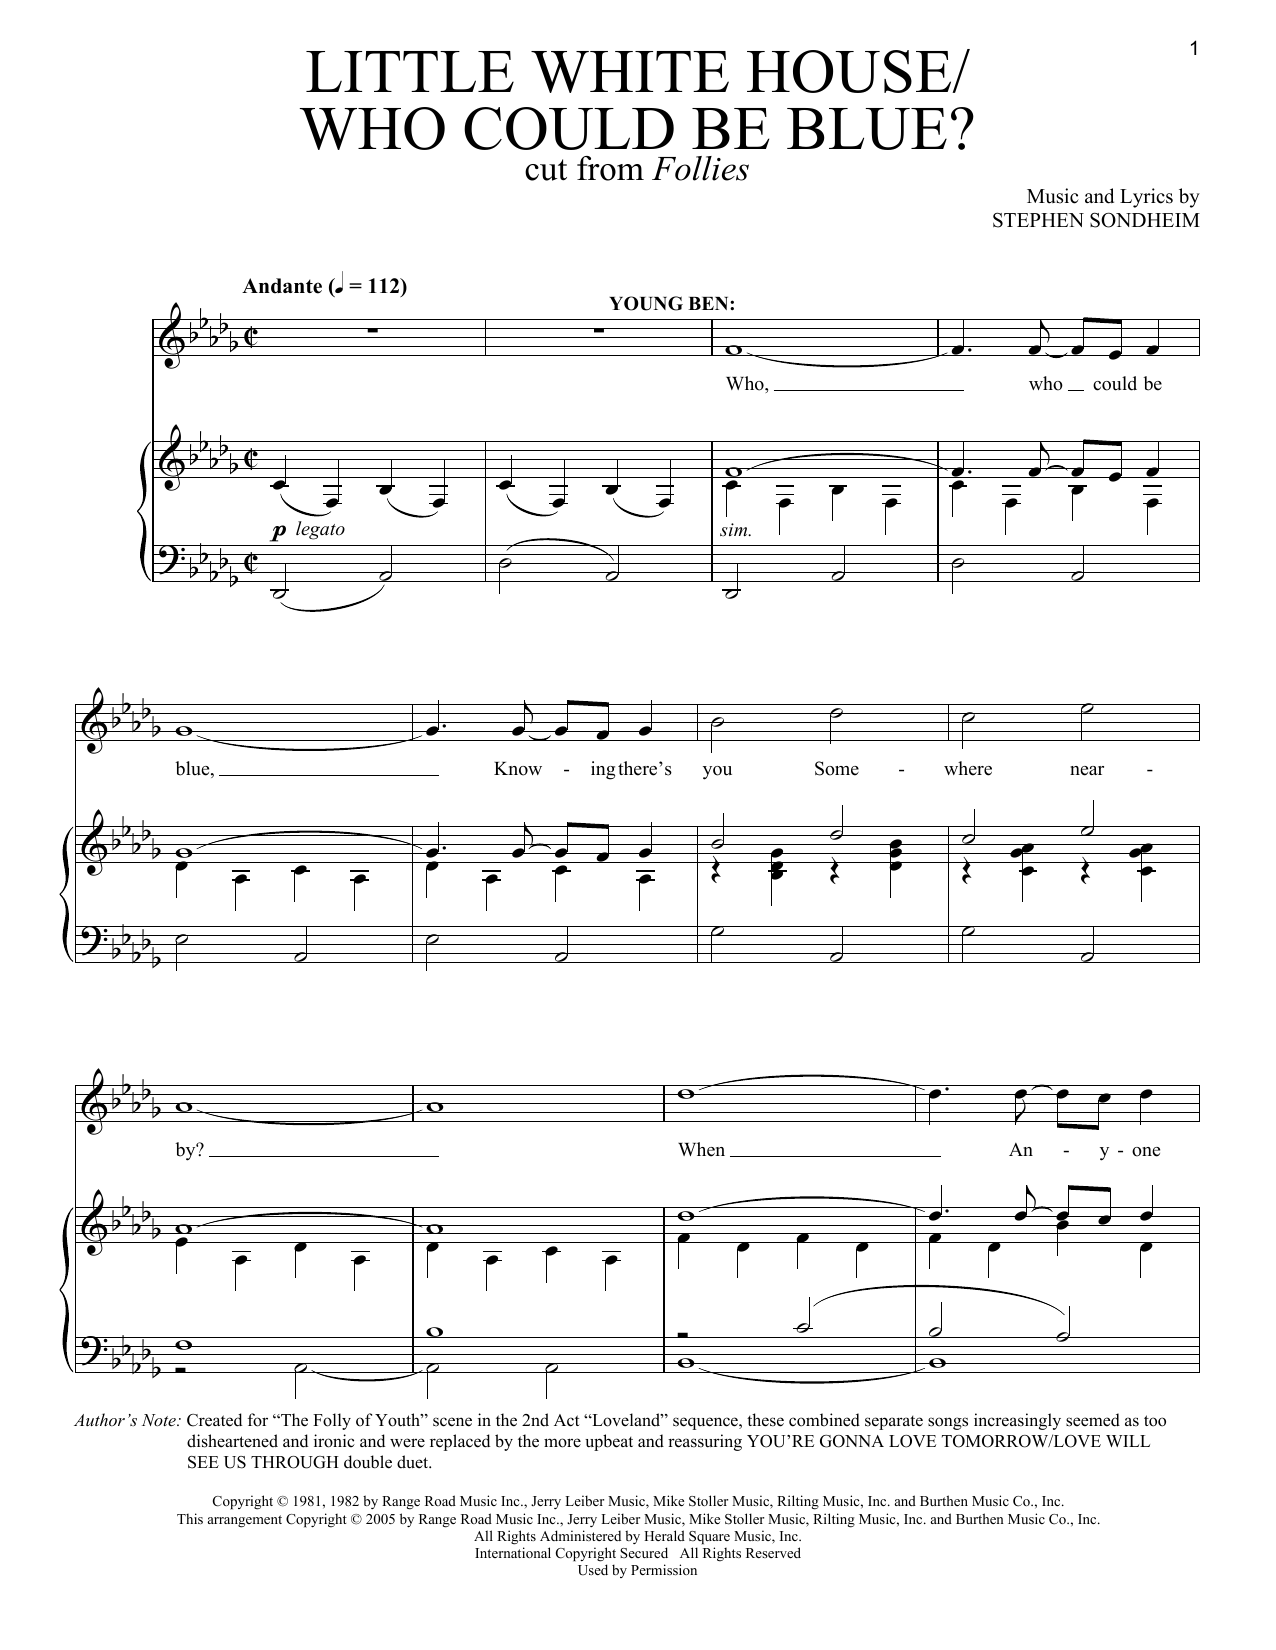 Stephen Sondheim Little White House/Who Could Be Blue? sheet music notes and chords. Download Printable PDF.